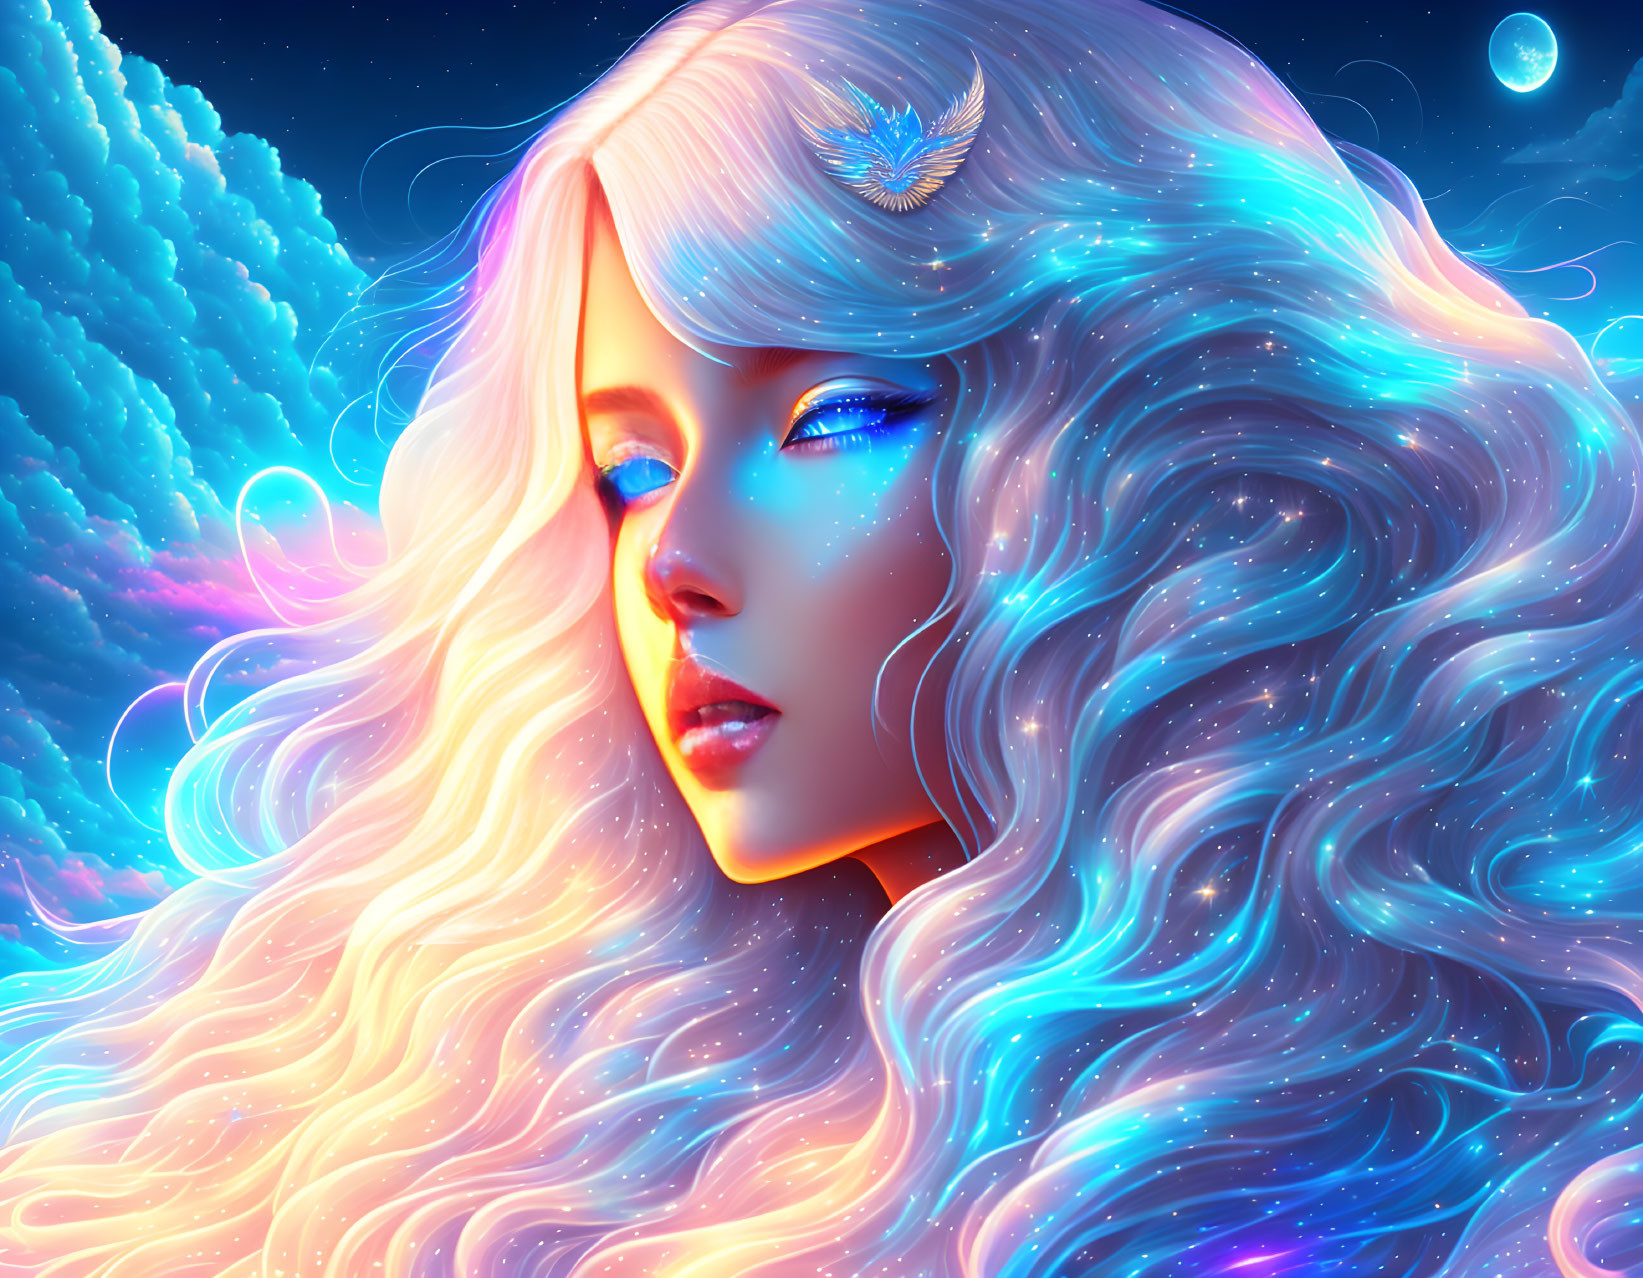 Colorful surreal portrait of fantasy woman with flowing hair and winged creature in starry sky.